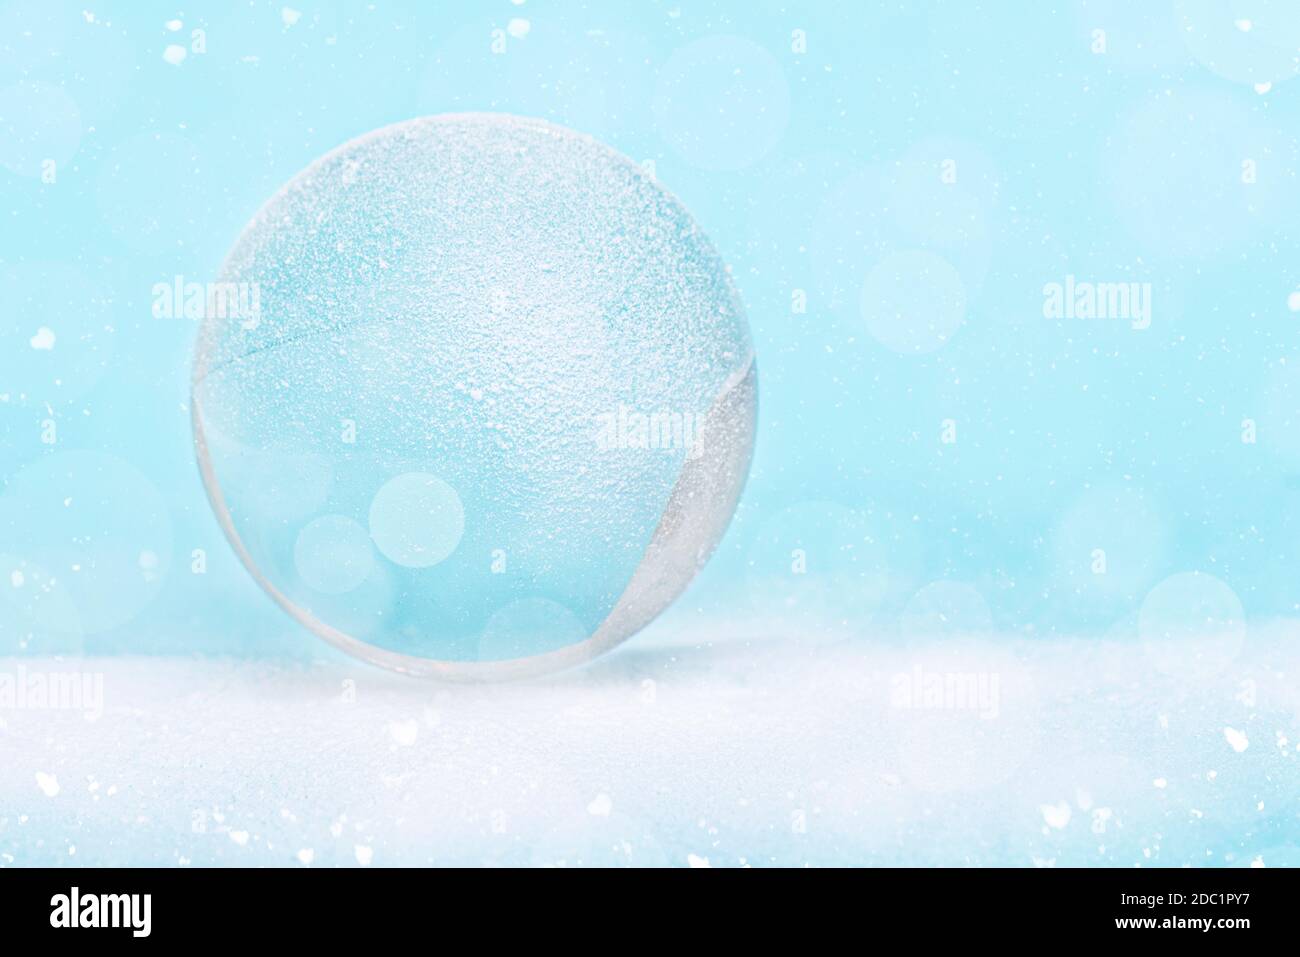 Snowglobe or glass ball covered by snow with glitter, Christmas decoration, layout, space for text, postcard. Stock Photo